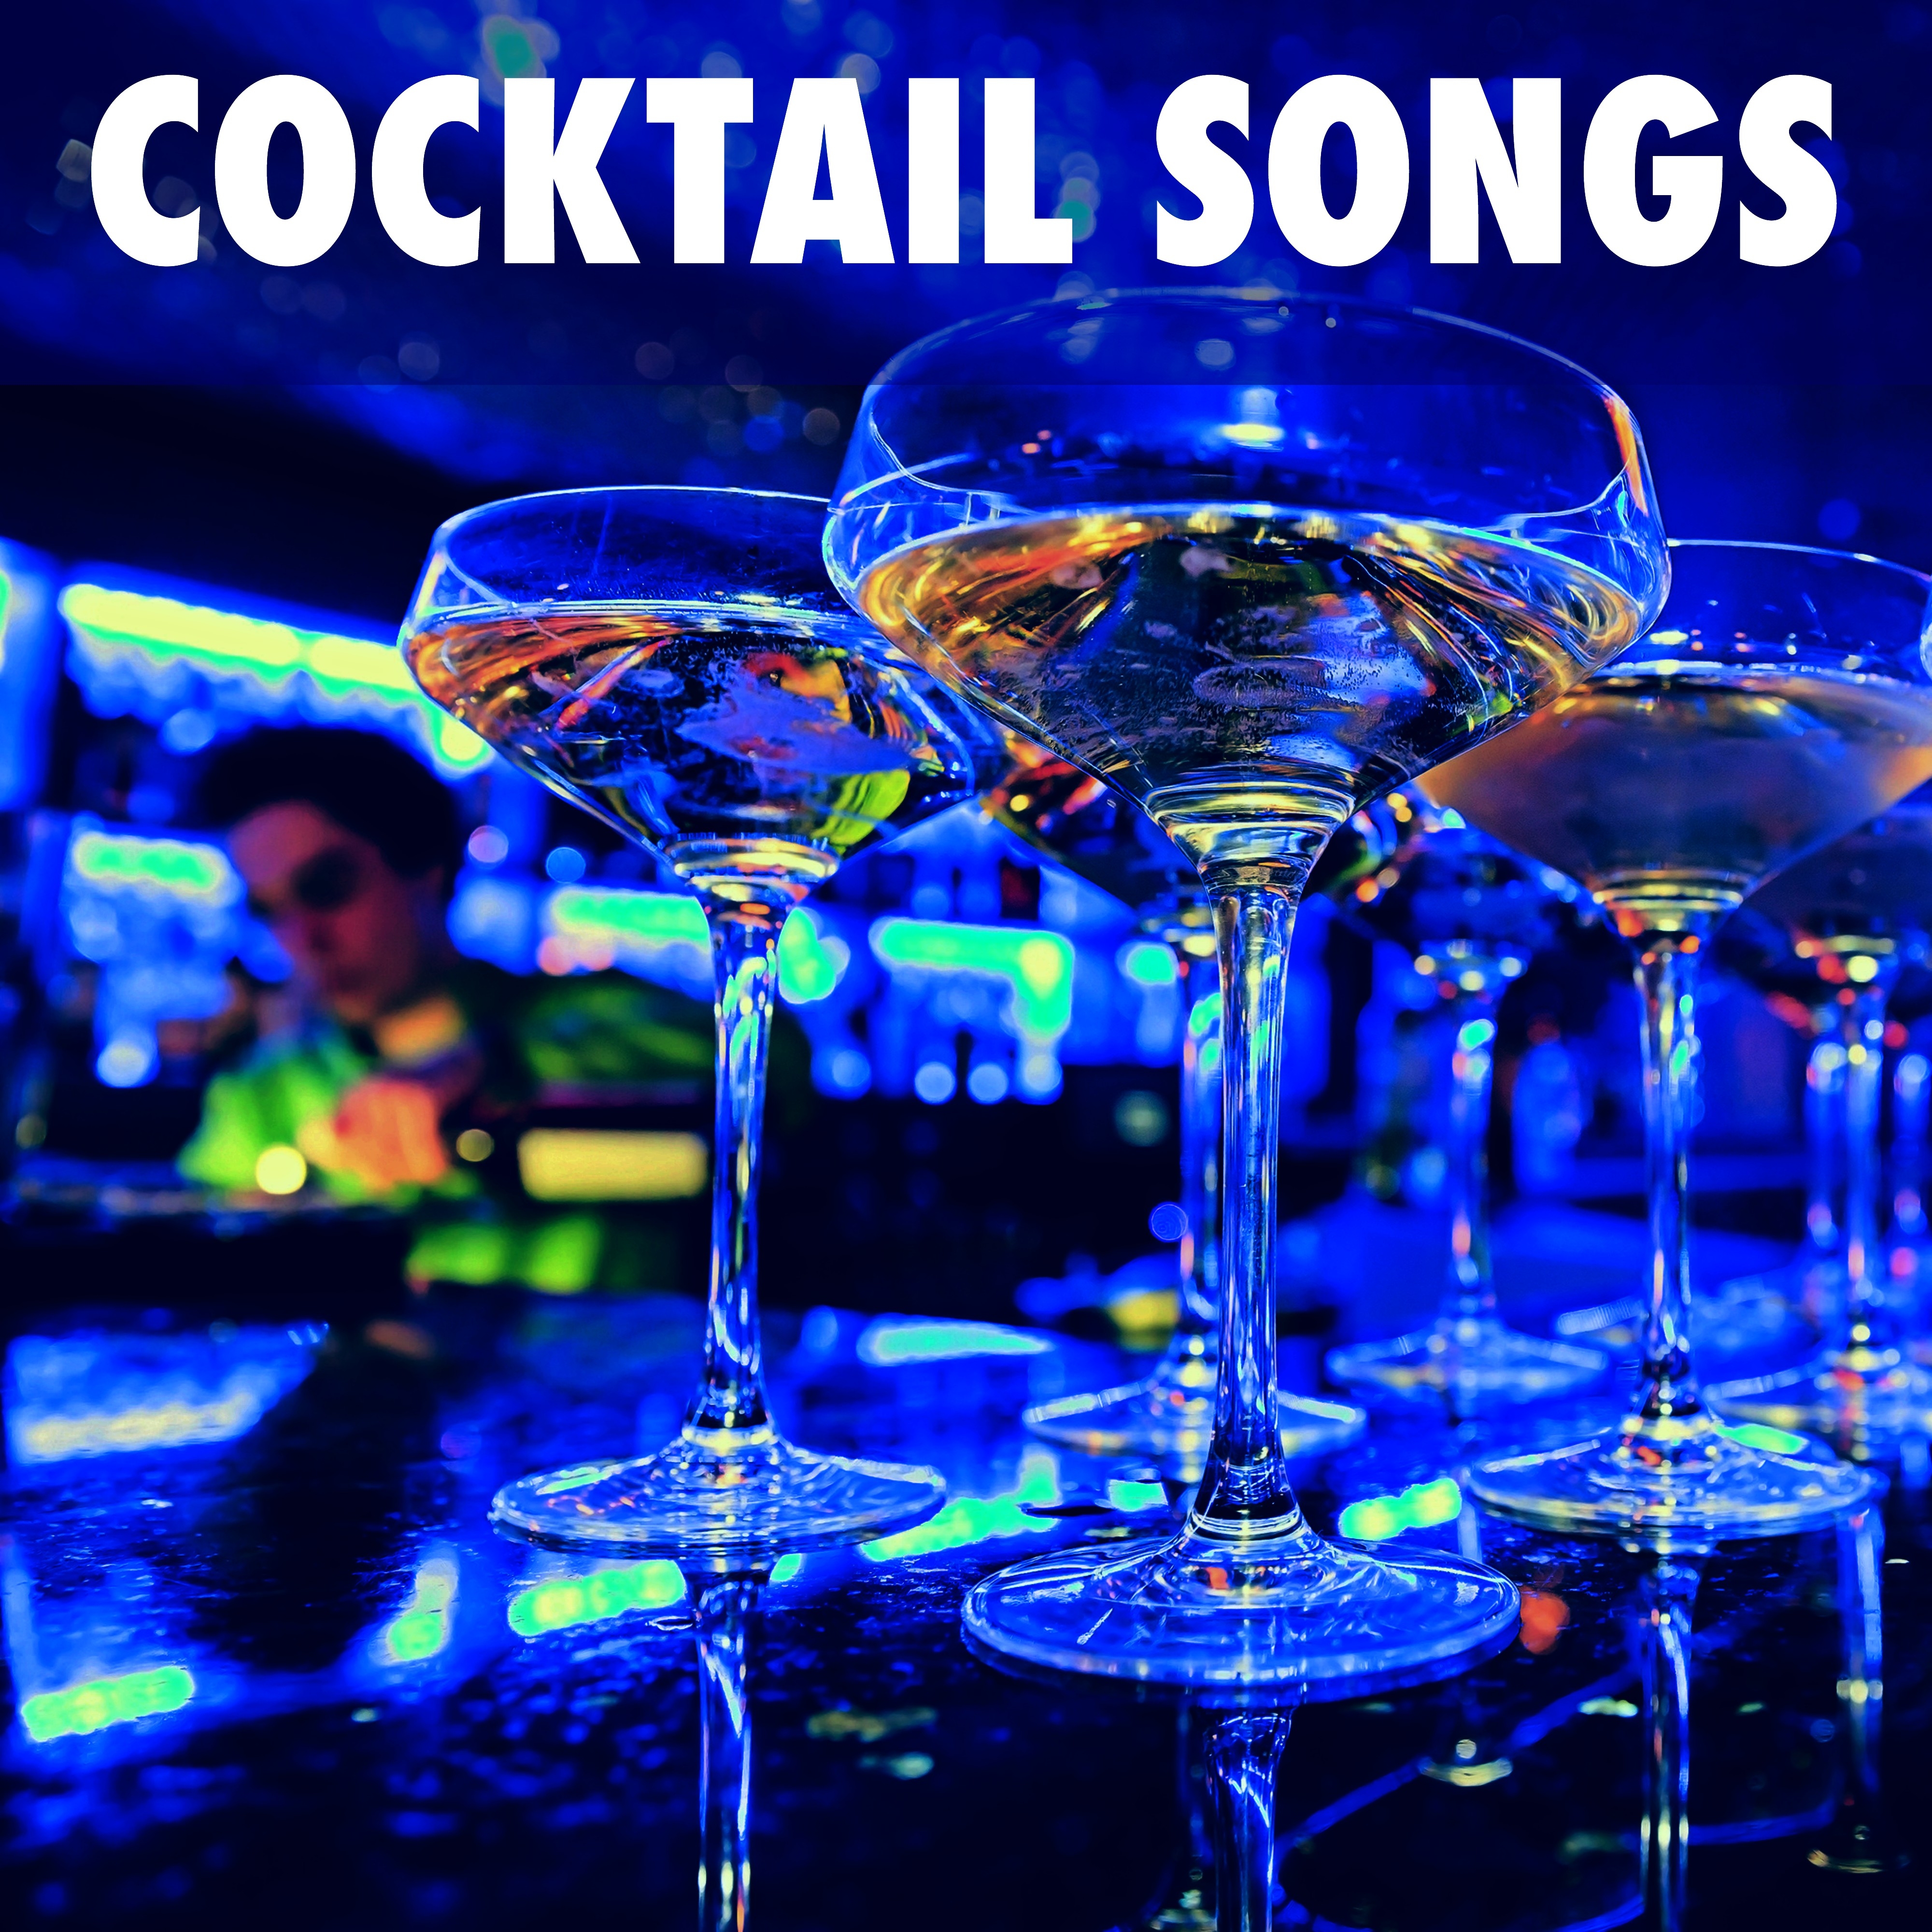 Cocktail Songs - Instrumental Chill Out Lounge Music to Relax & Drink